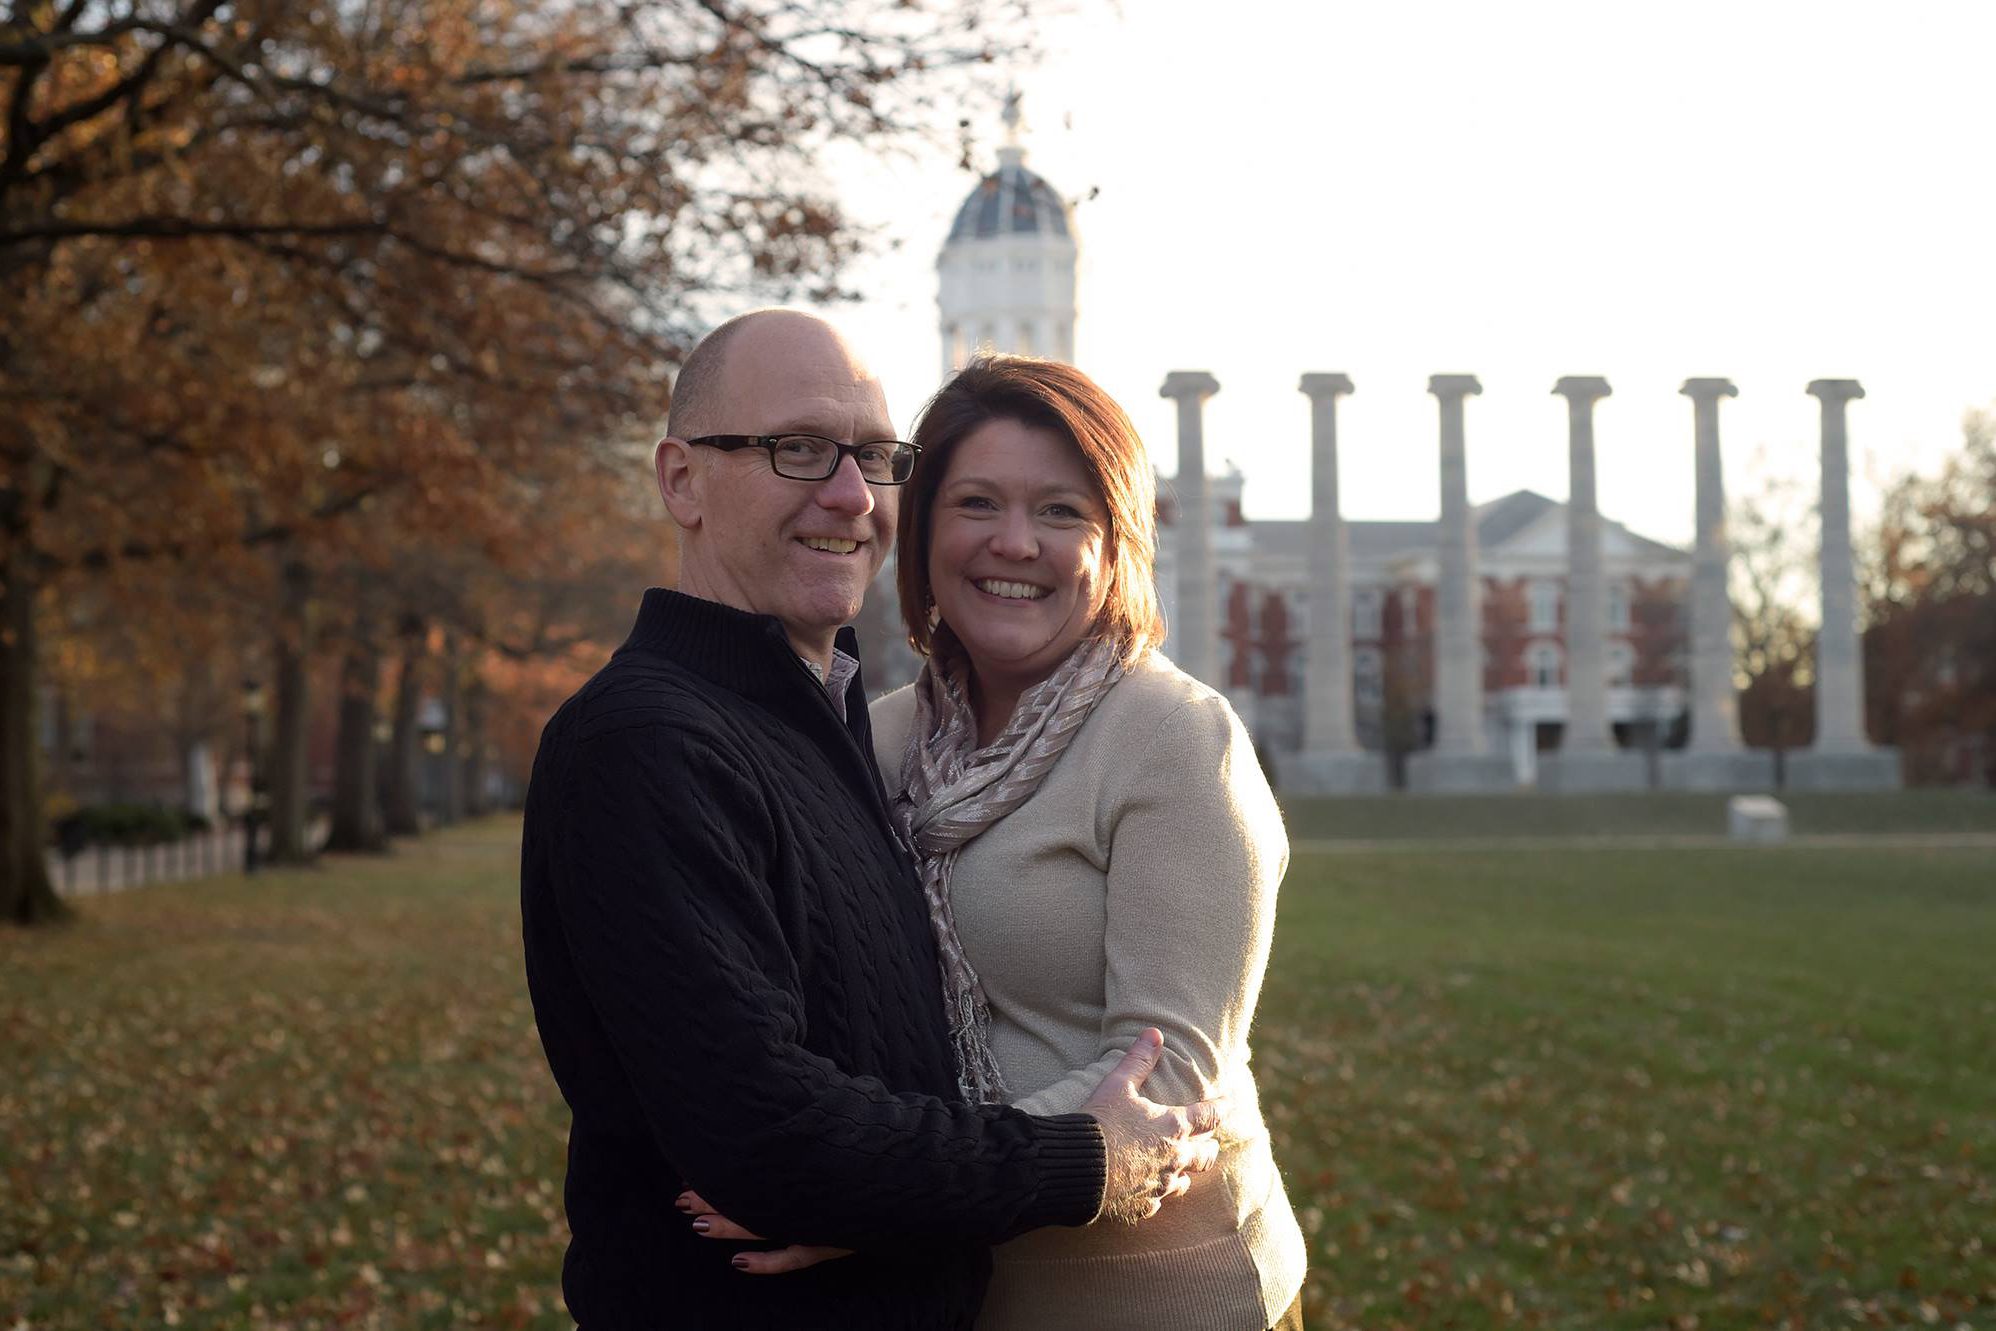 Megan and Stan Silvey pose for a photo on the quad. the columns are in the background